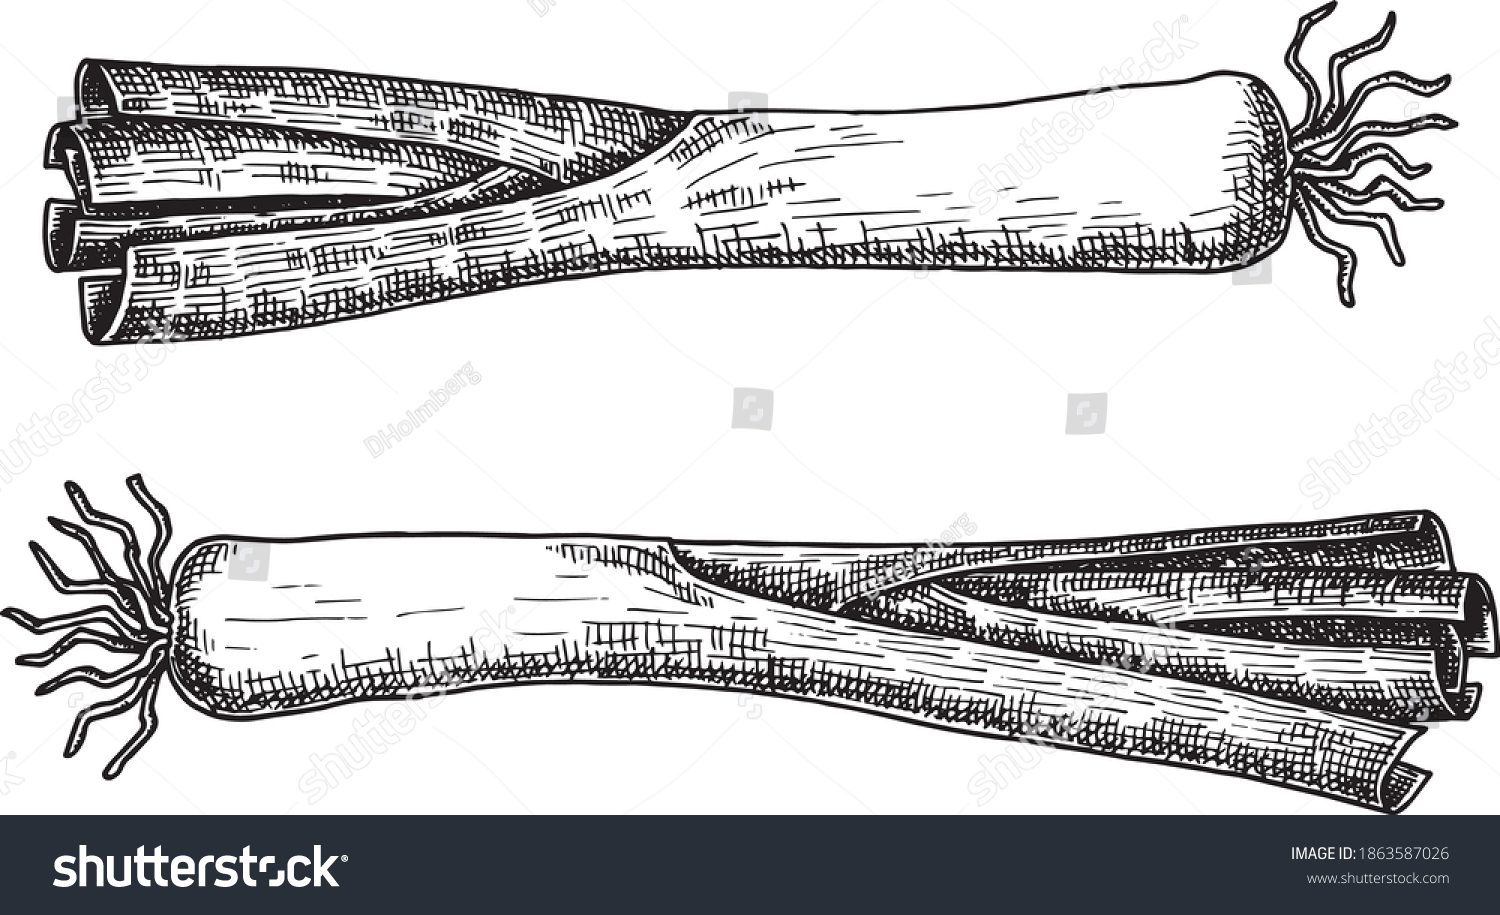 Hand drawn black and white crosshatch vector illustration of two leek. No background. #1863587026